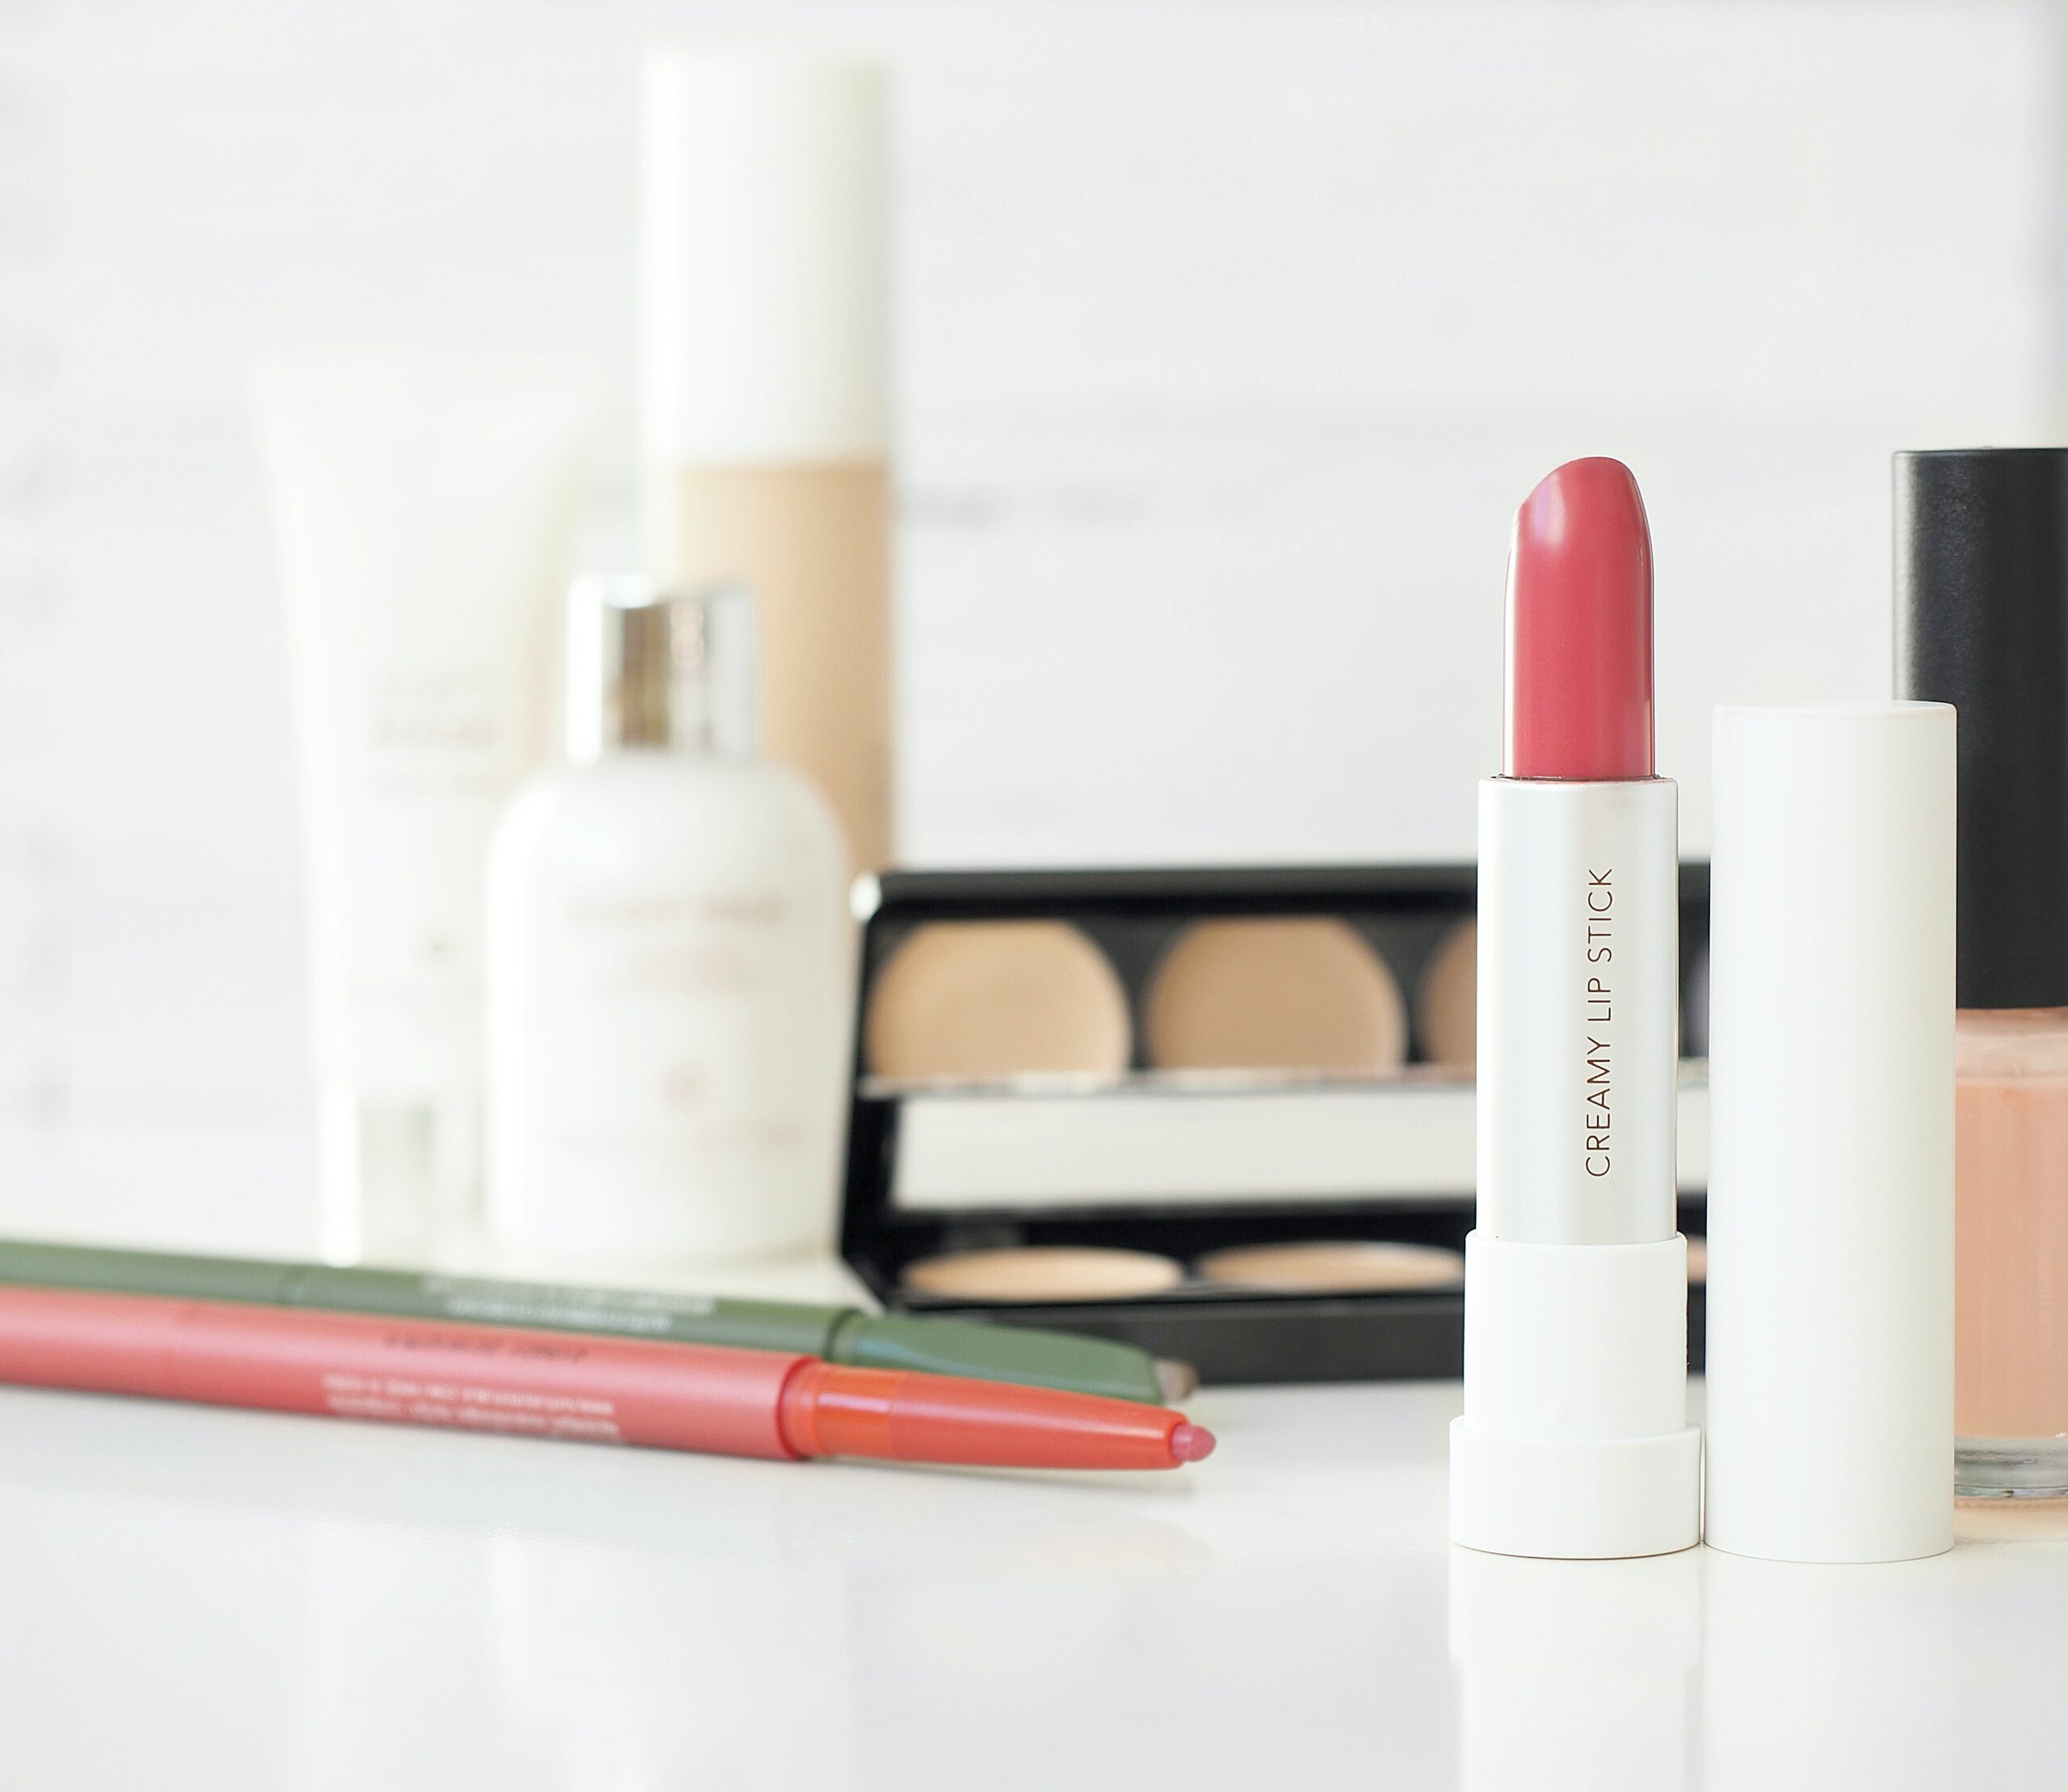 Beauty Blog post image featuring makeup on a counter.